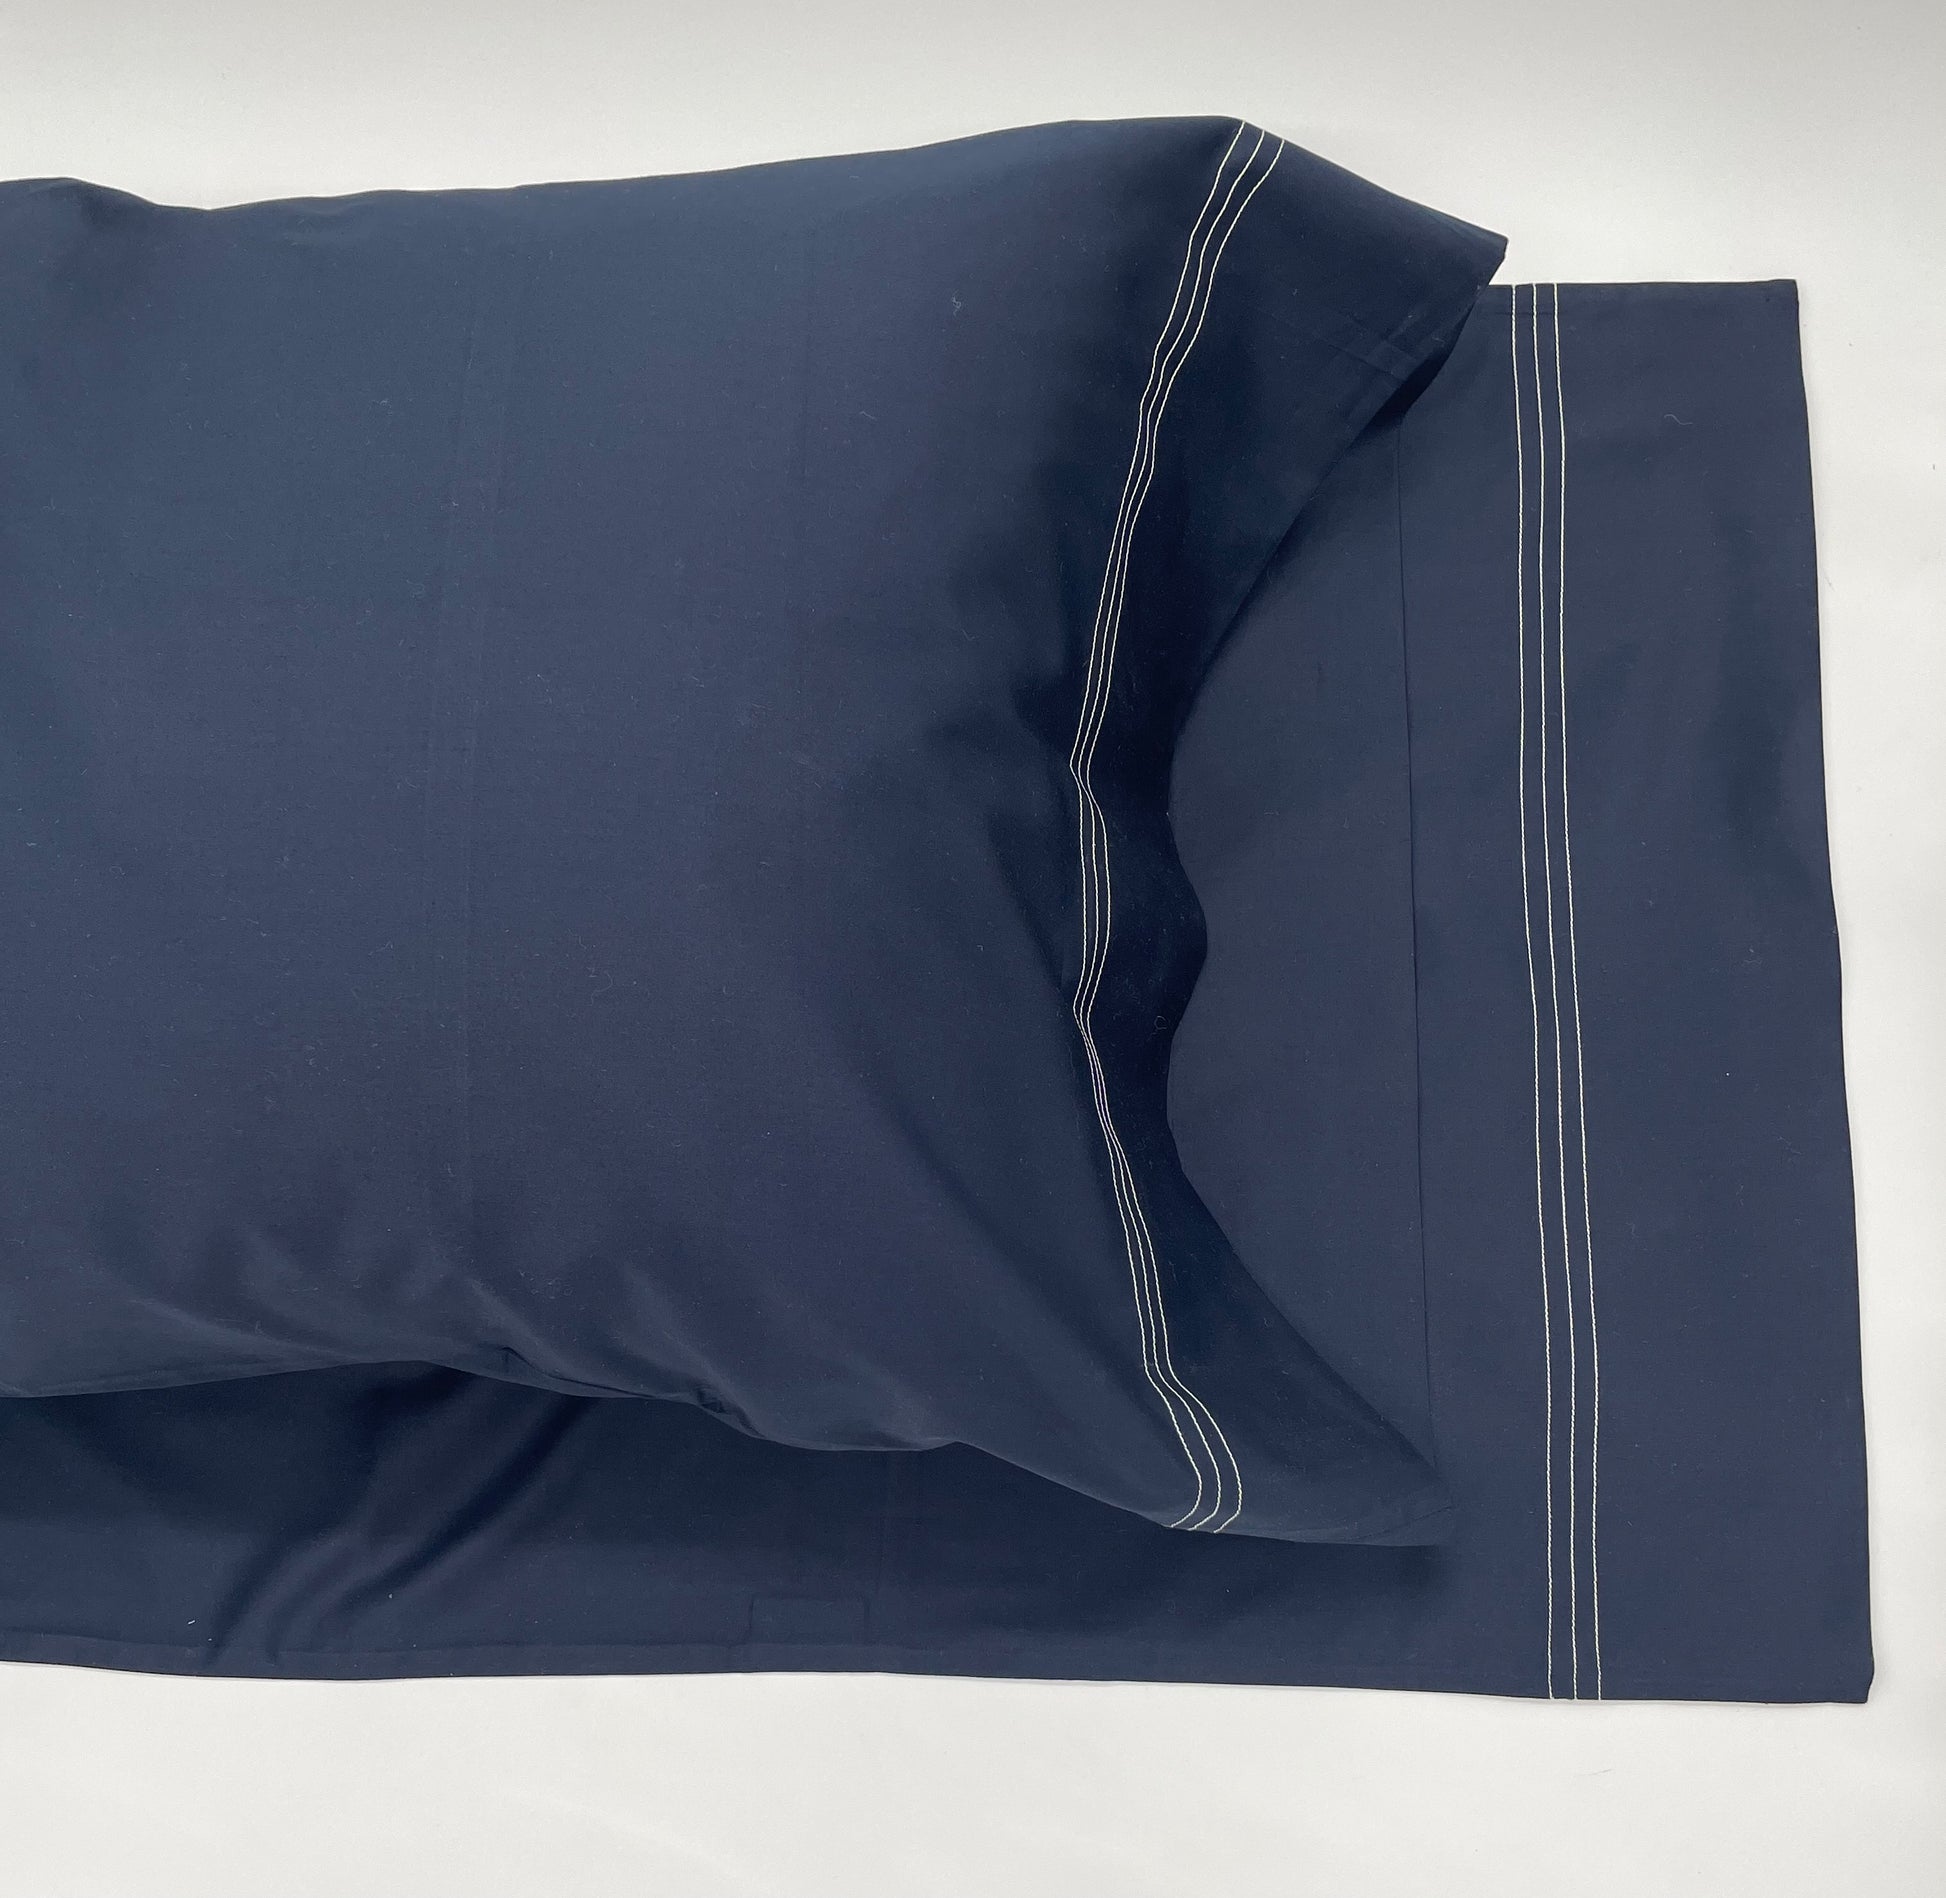 Narragansett Deep Sea Pillow Case with a triple contrasting stitch in White.